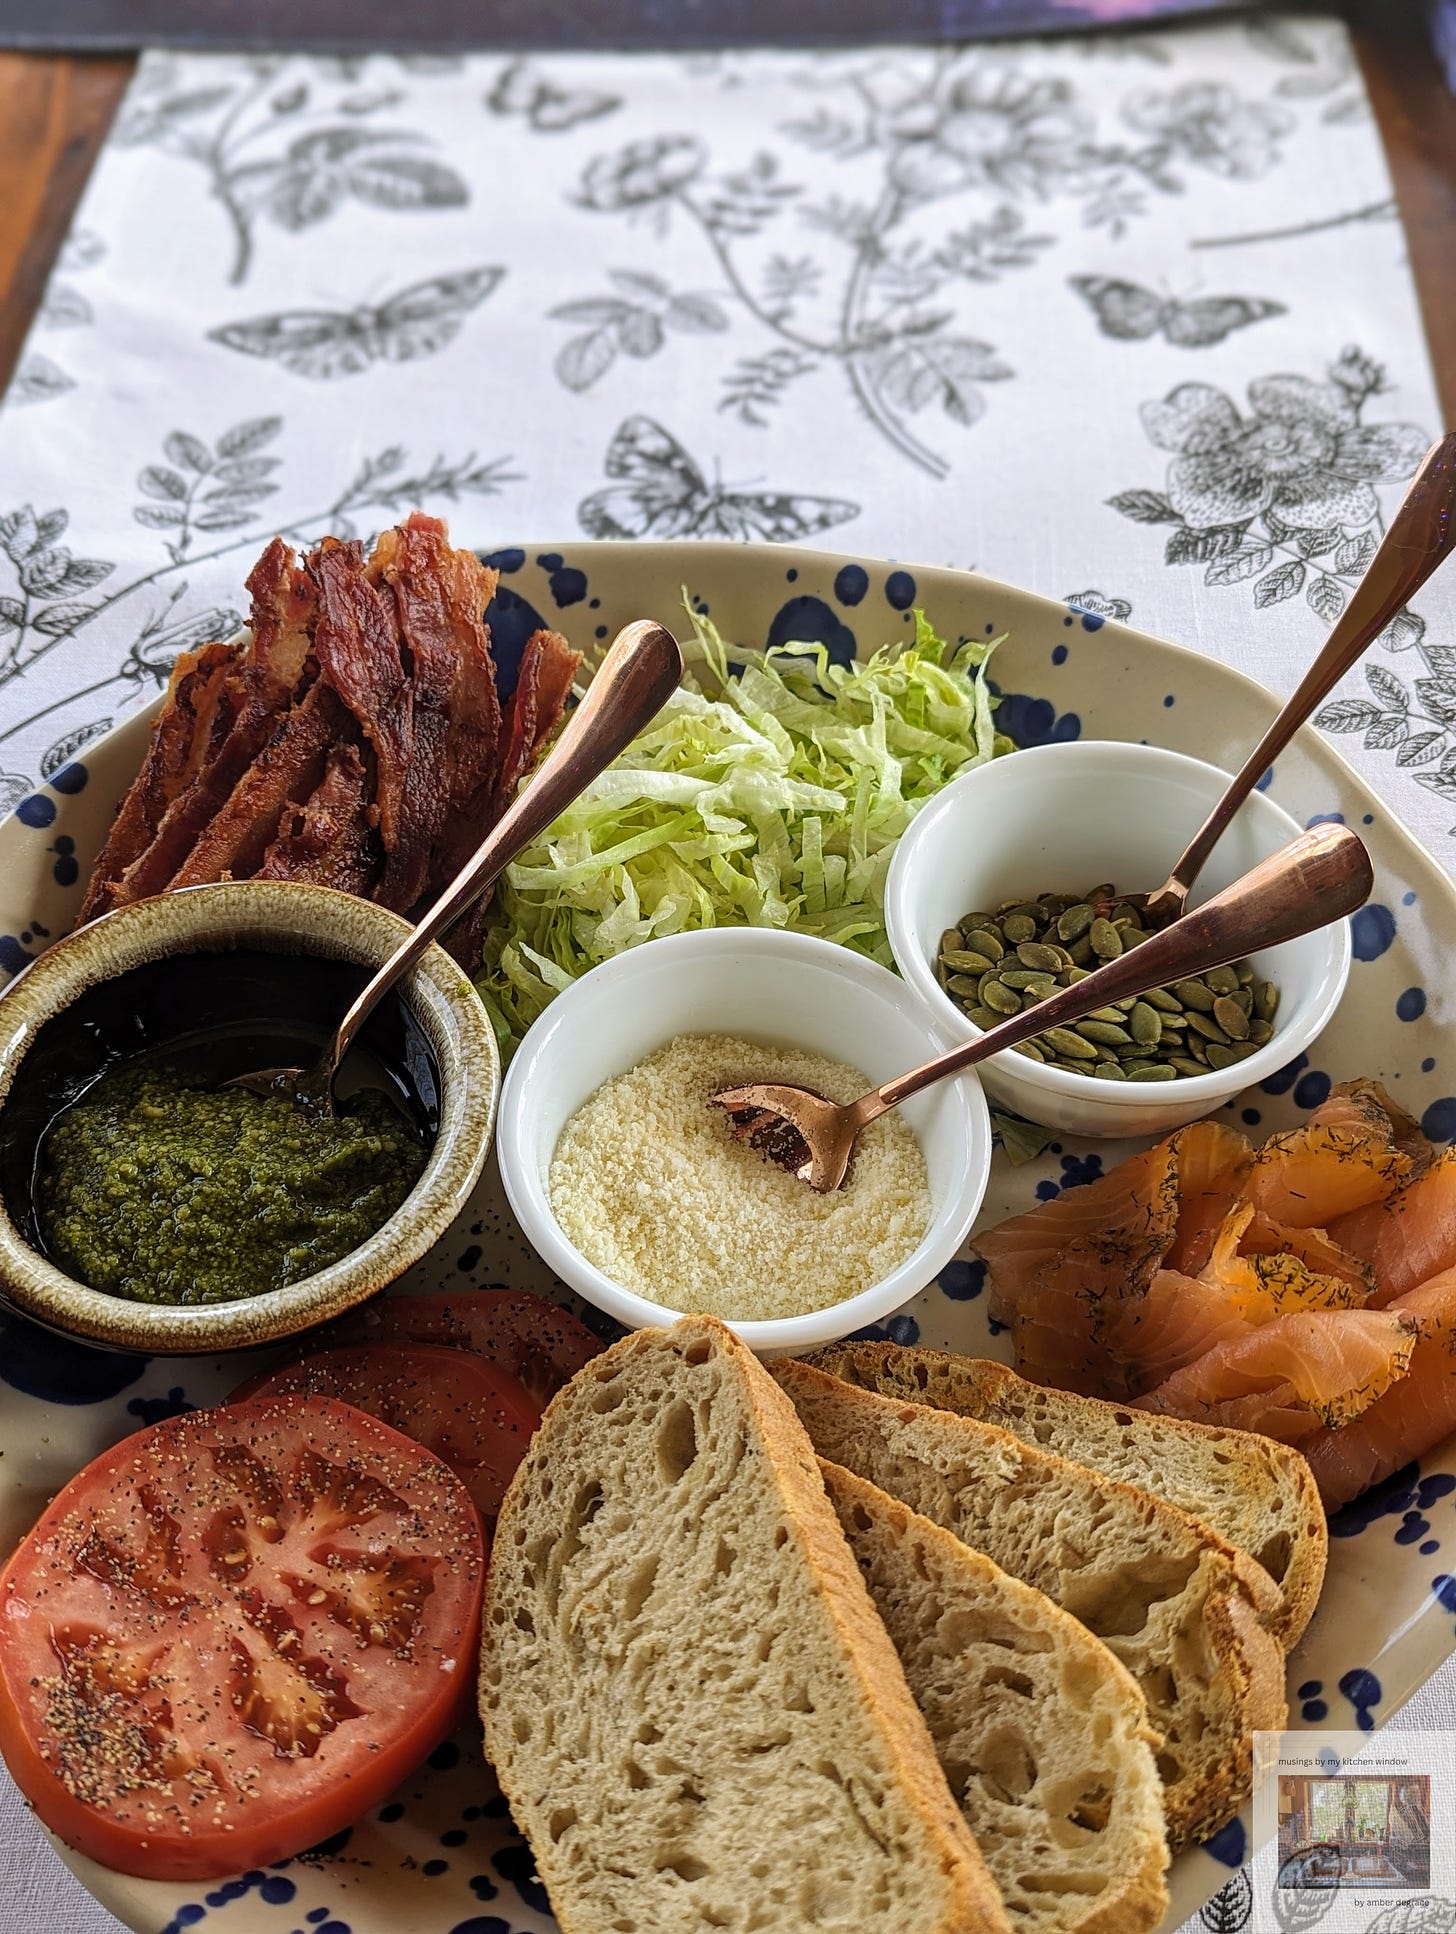 A non-traditional BLT board including smoked salmon, pesto, and pumpkin seeds.